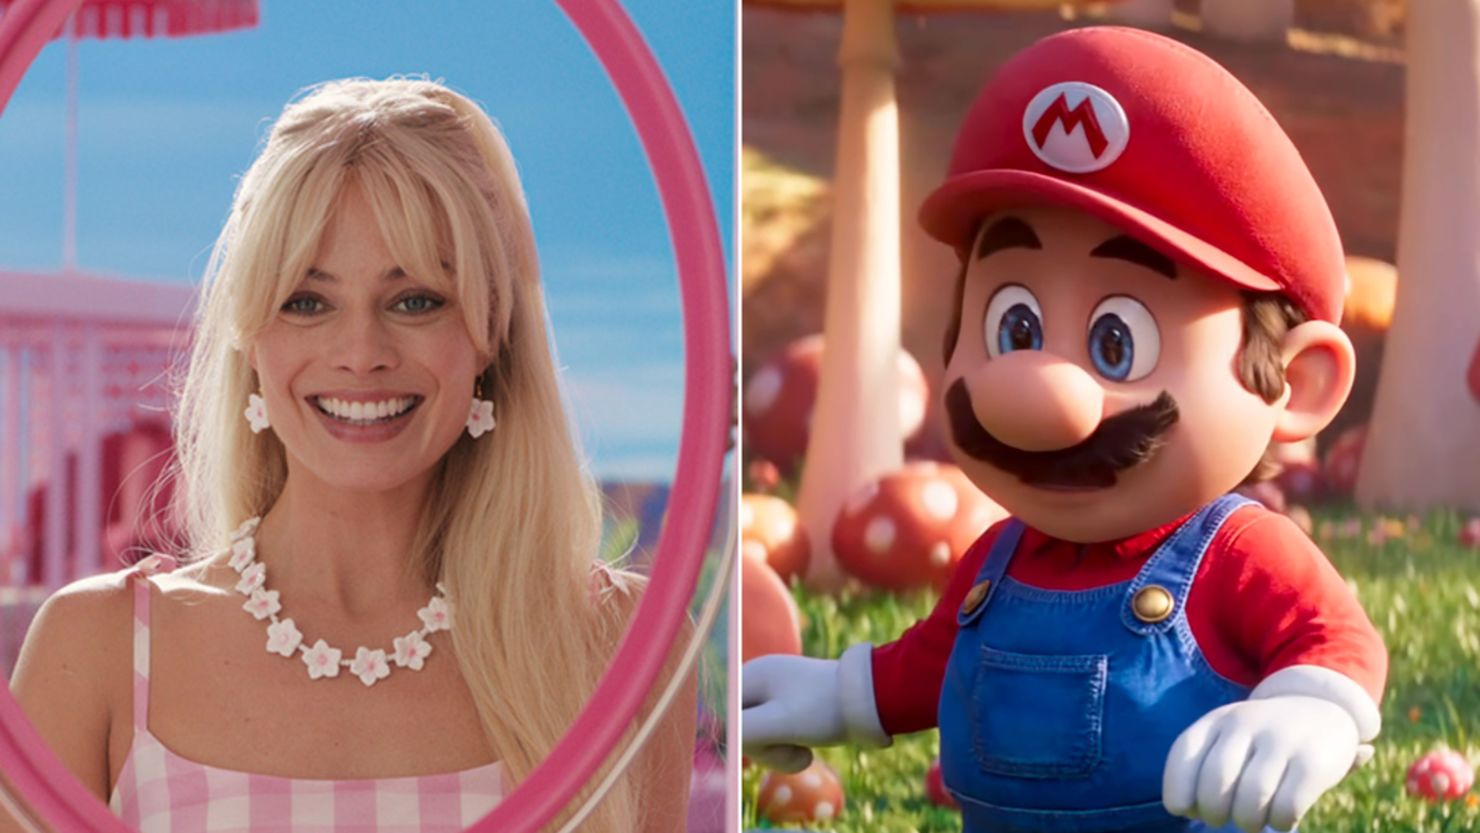 Barbie took the title away from the Mario Bros. to become highest-grossing movie at the domestic box office this year.